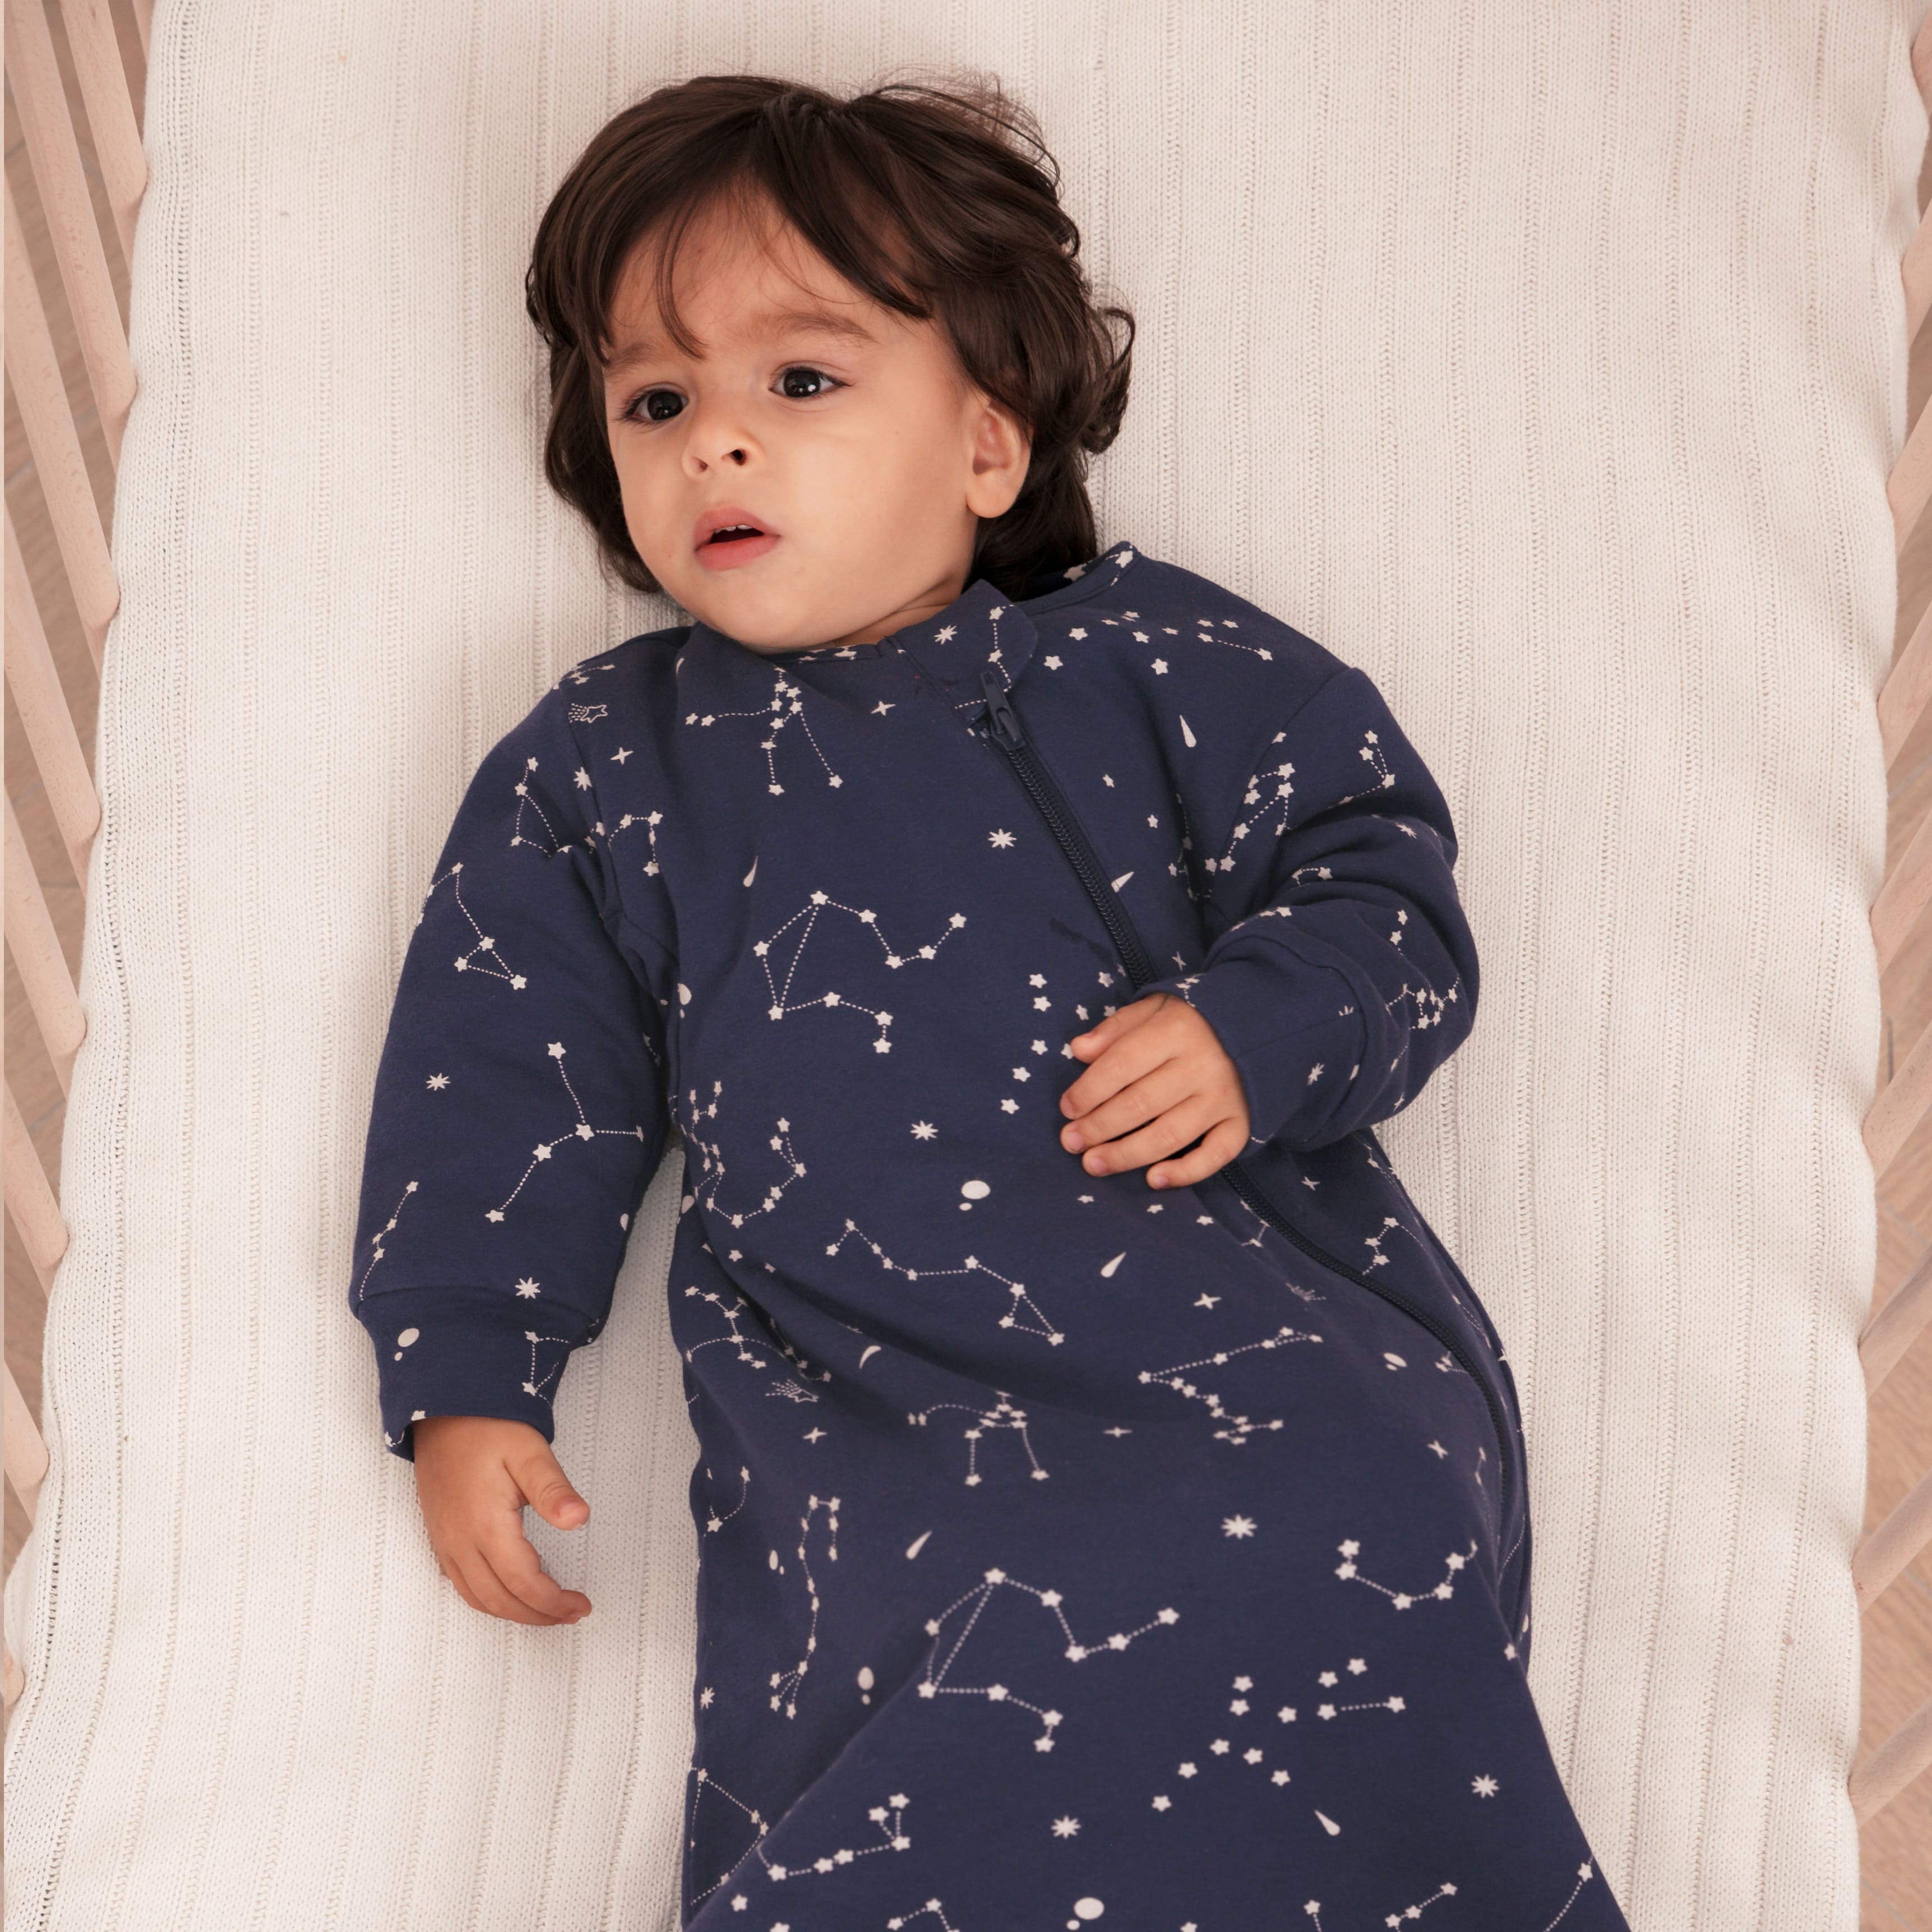 camel-wool-winter-sleep-sack-with-arms-3-5-tog-constellation